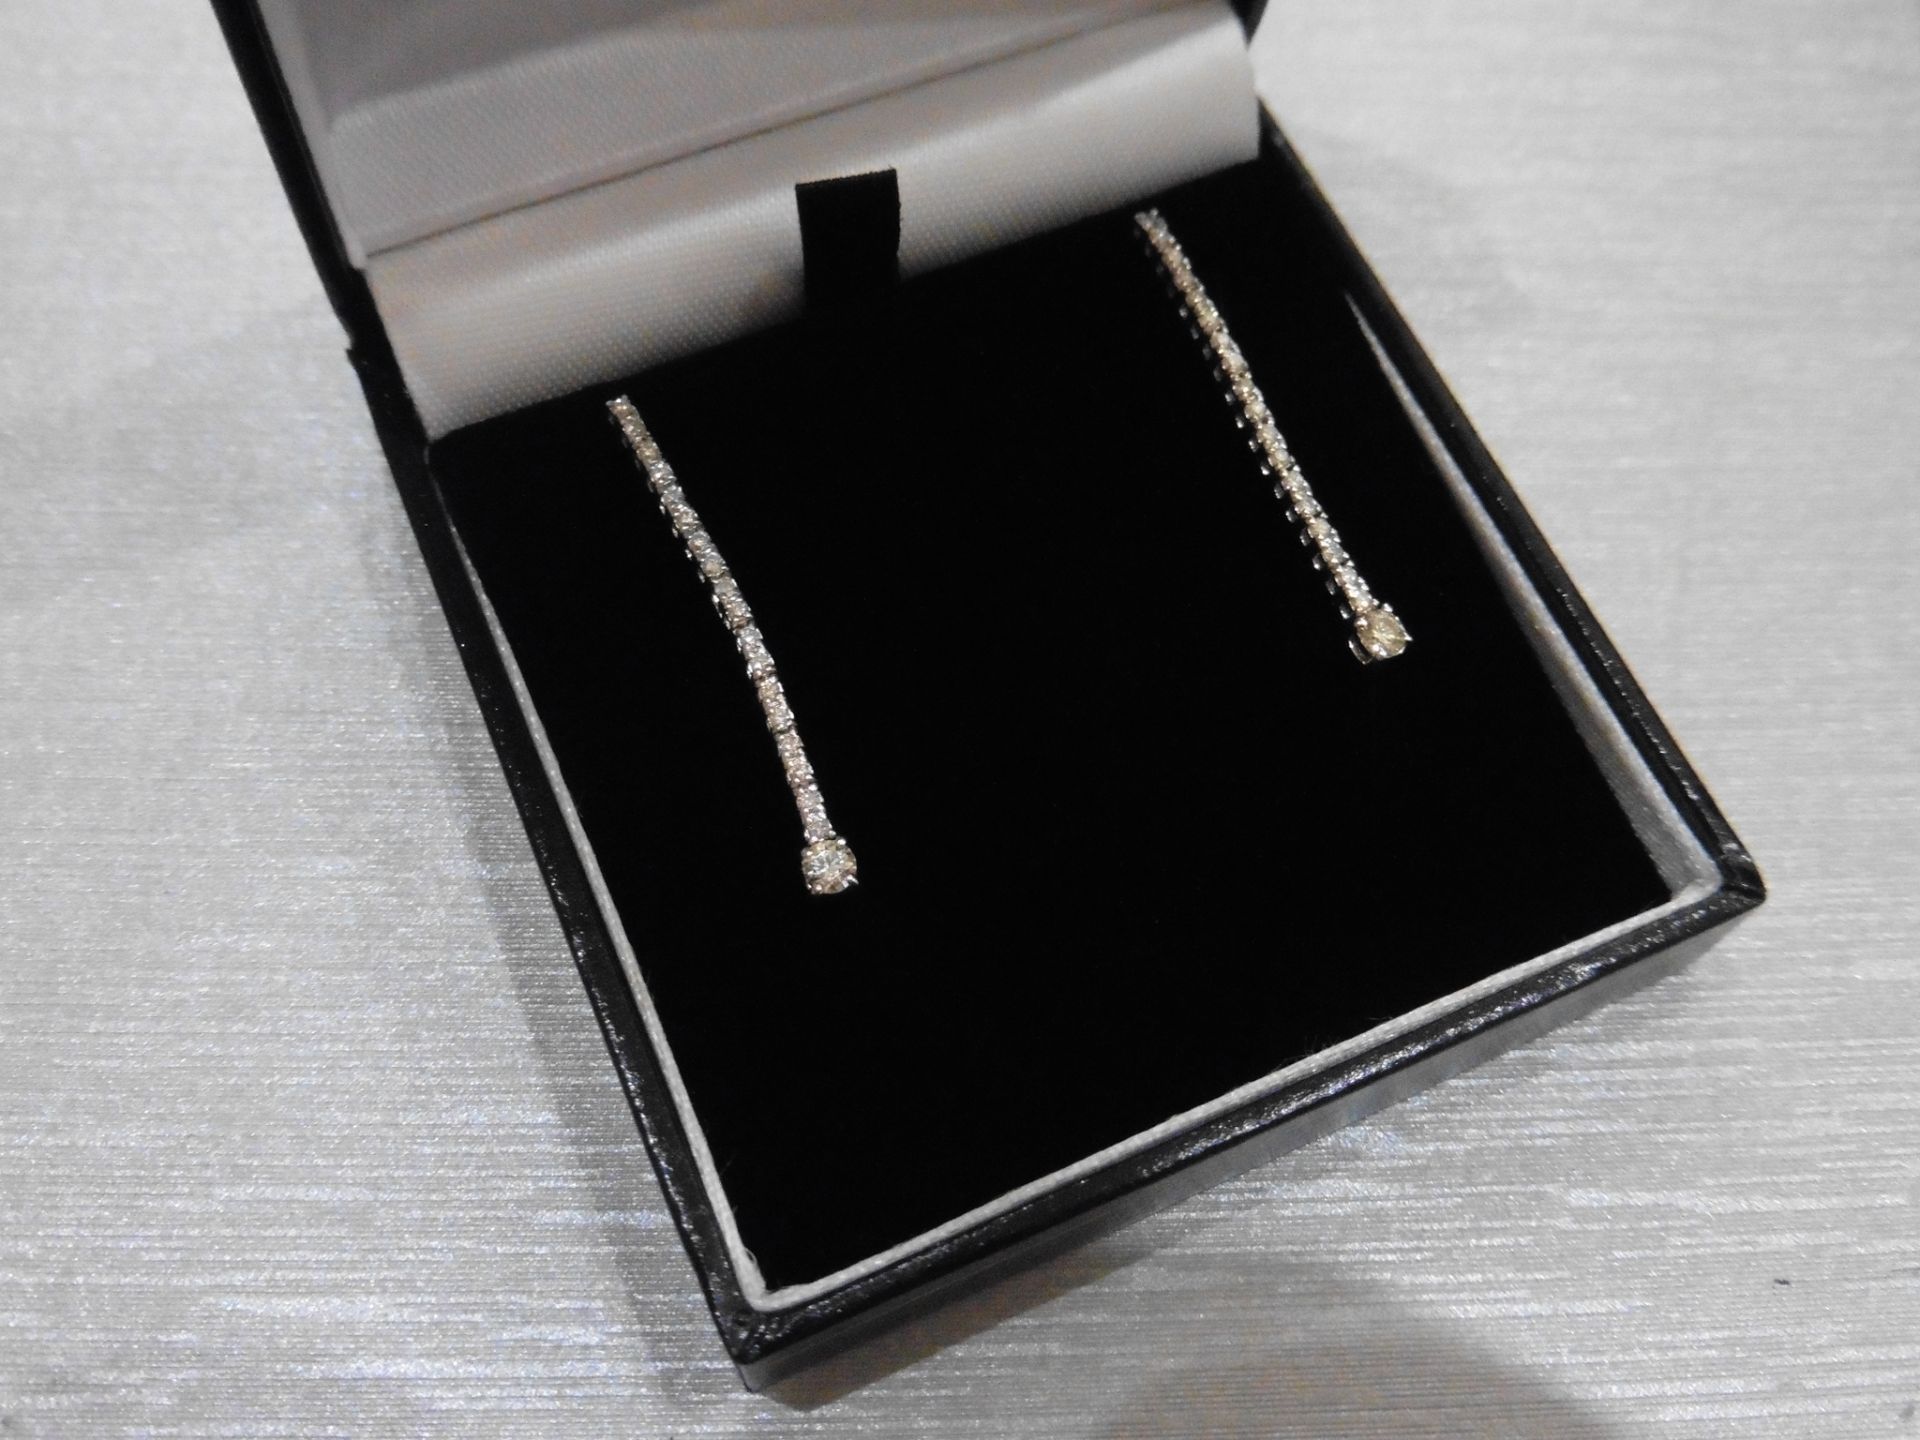 0.60ct 18ct white gold diamond drop earrings set with brilliant cut diamonds. I colour, si2 clarity. - Image 4 of 4